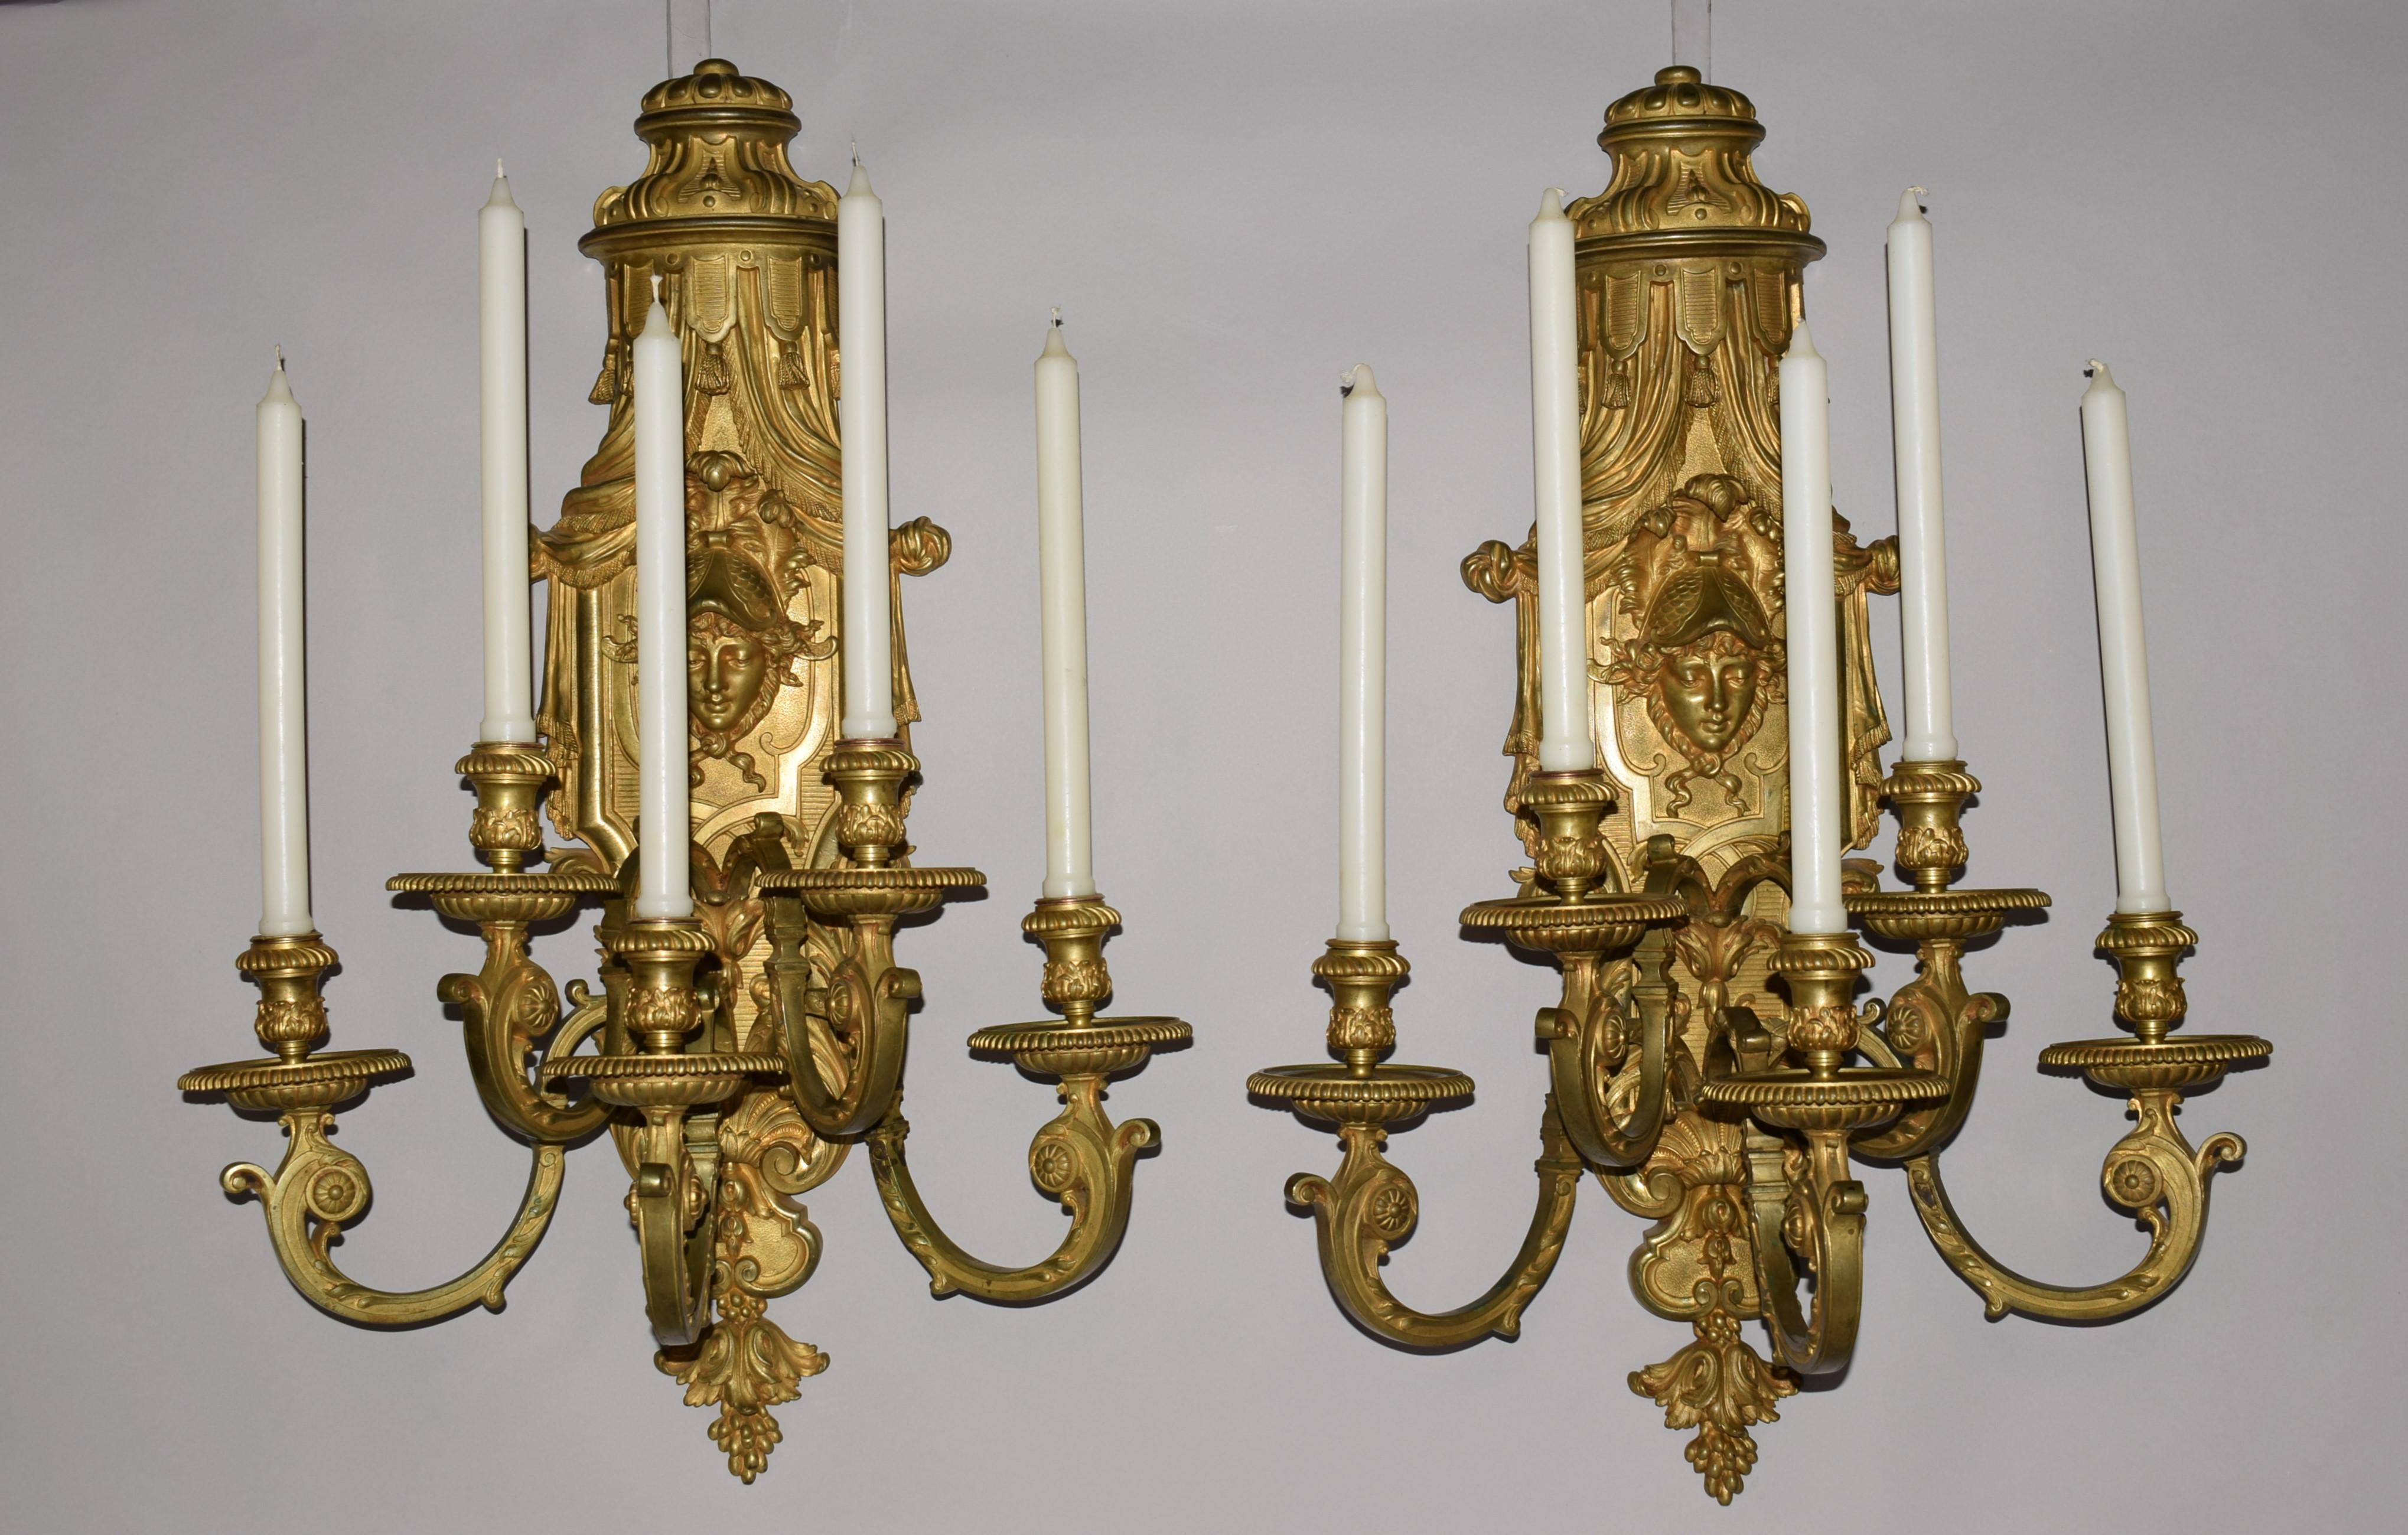 A superb pair of gilt bronze regency style wall sconces. The back plate depicting Athena wearing a helmet with petals issuing 